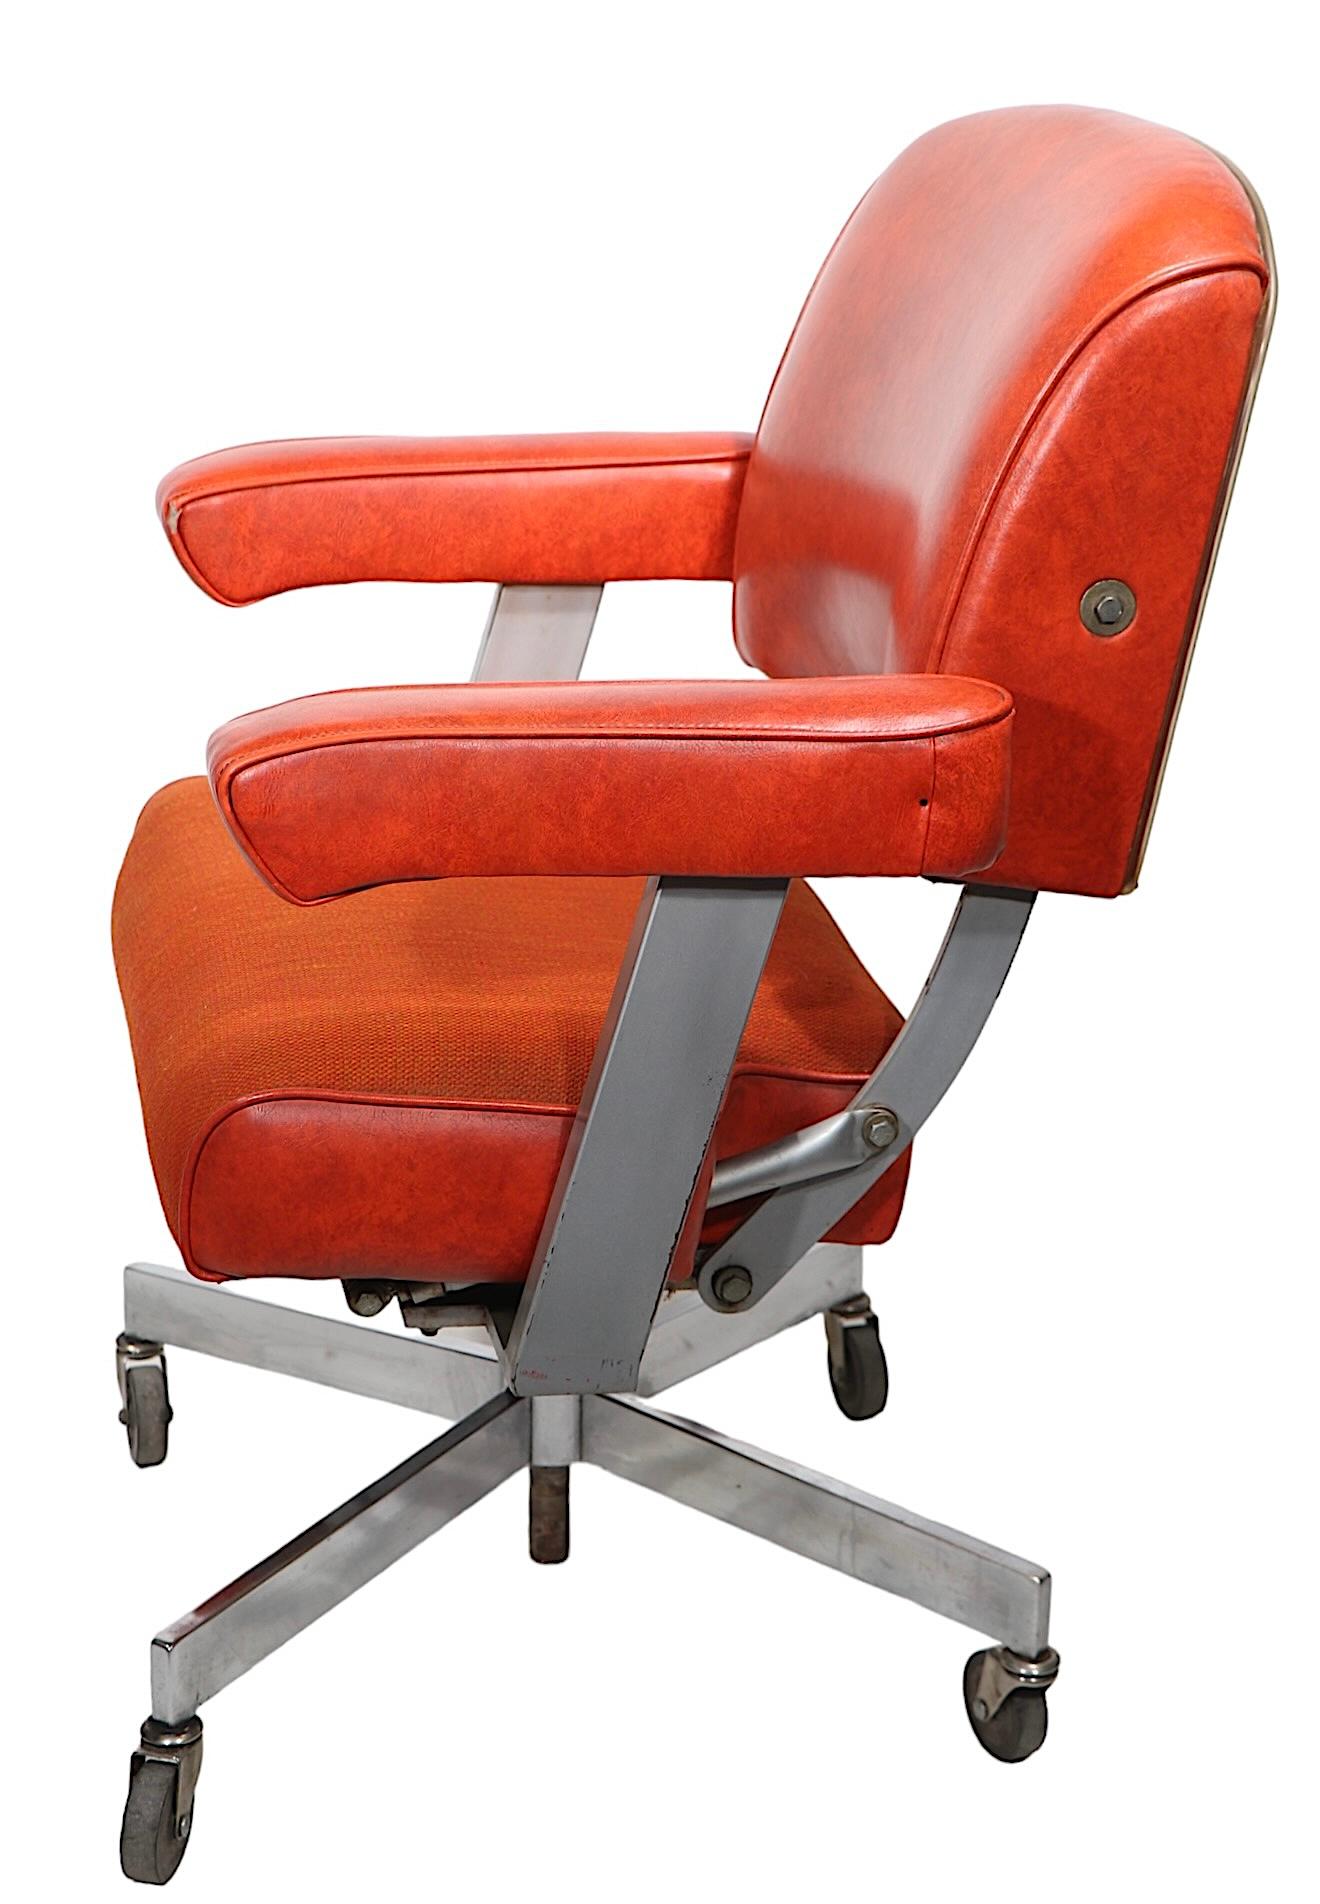 Executive Model DoMore Swivel Desk Office Chair Model 616 c 1950/1960's  For Sale 3